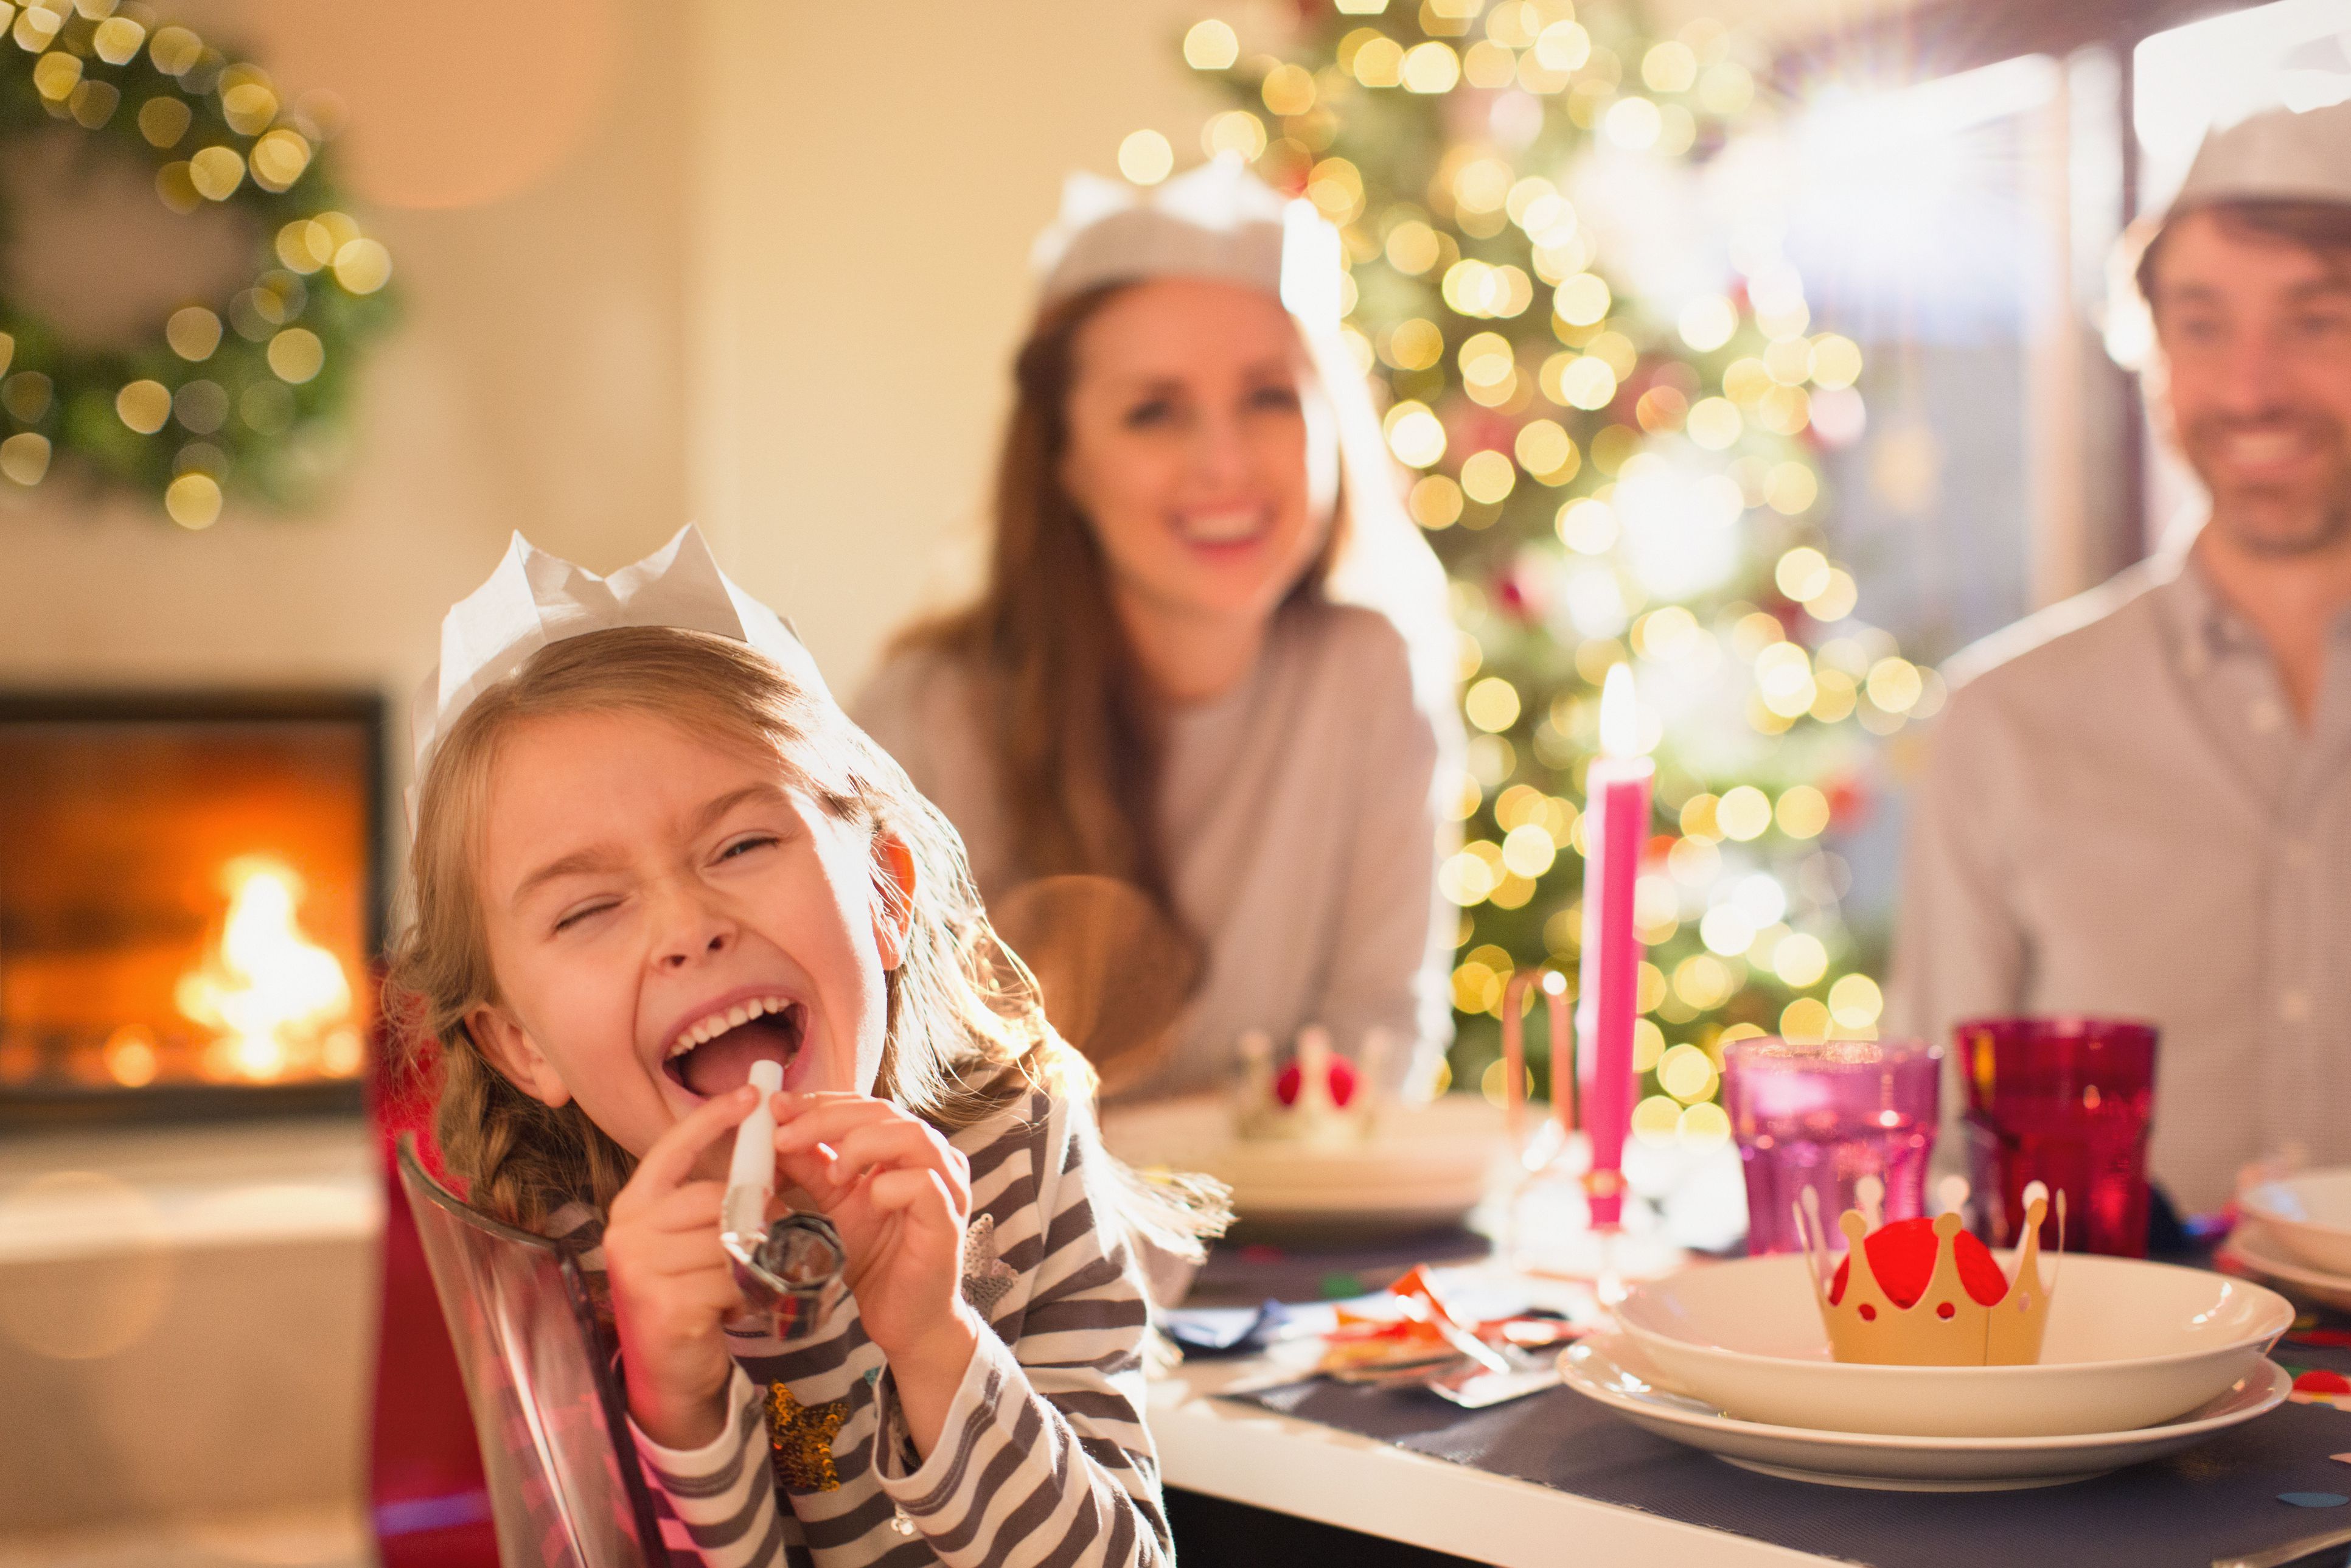 portrait playful girl in paper crown blowing party favor at christmas dinner table 59e65f e5a